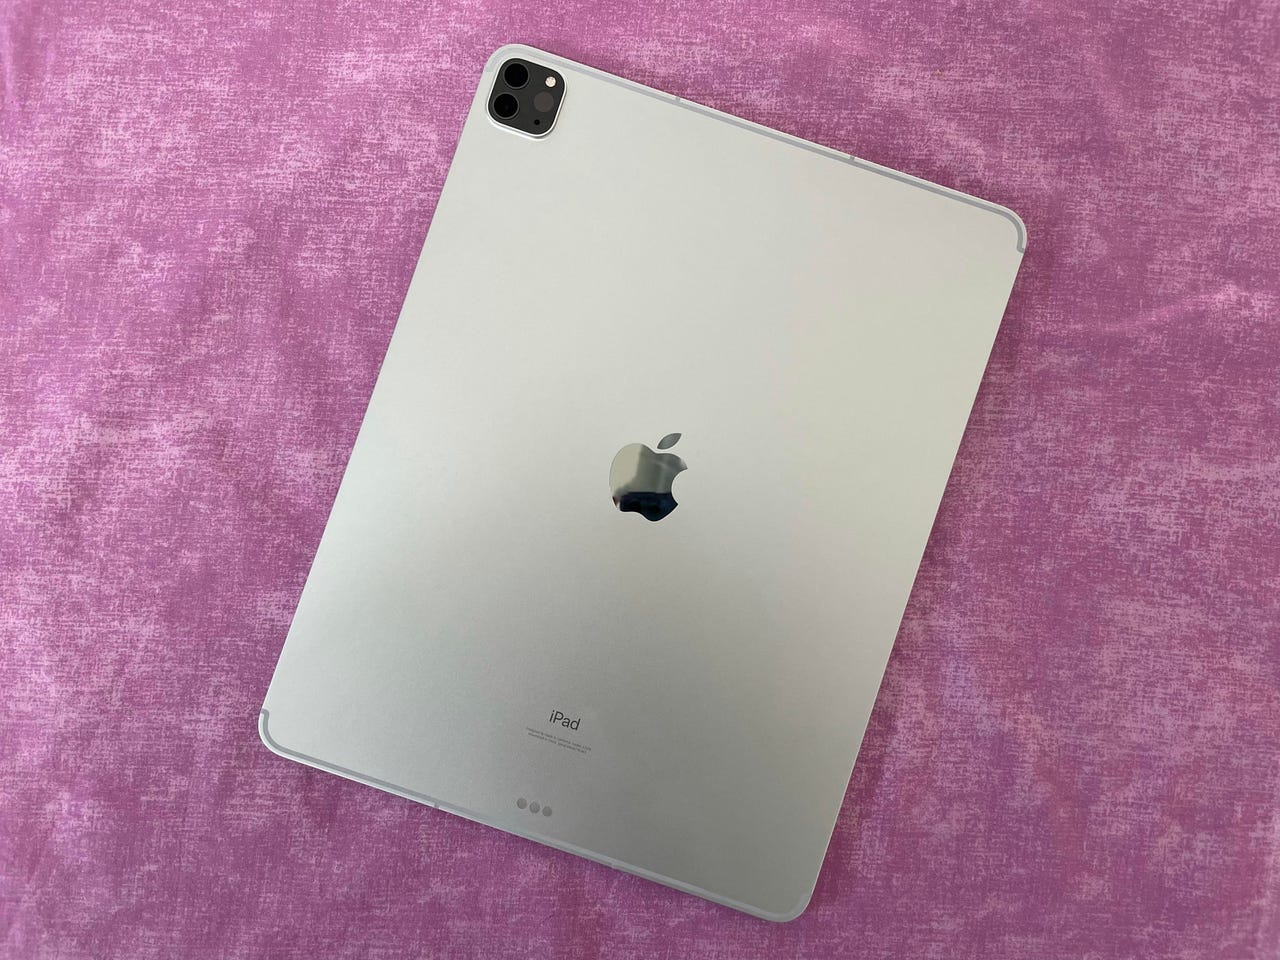 Apple iPad Pro (2021) review: Impressively powerful, but the